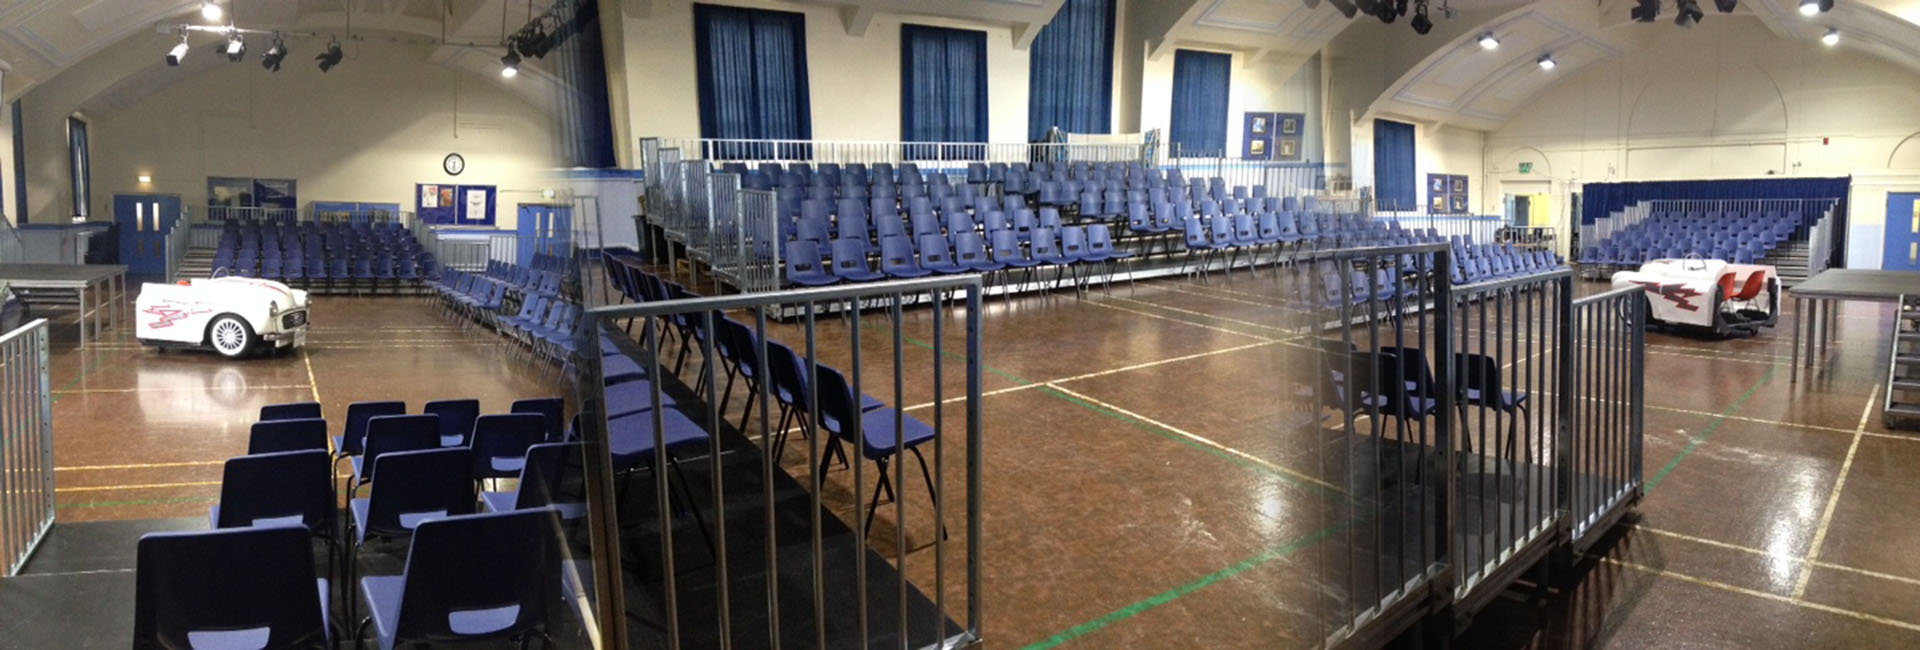 Lighting & PA Hire for Schools